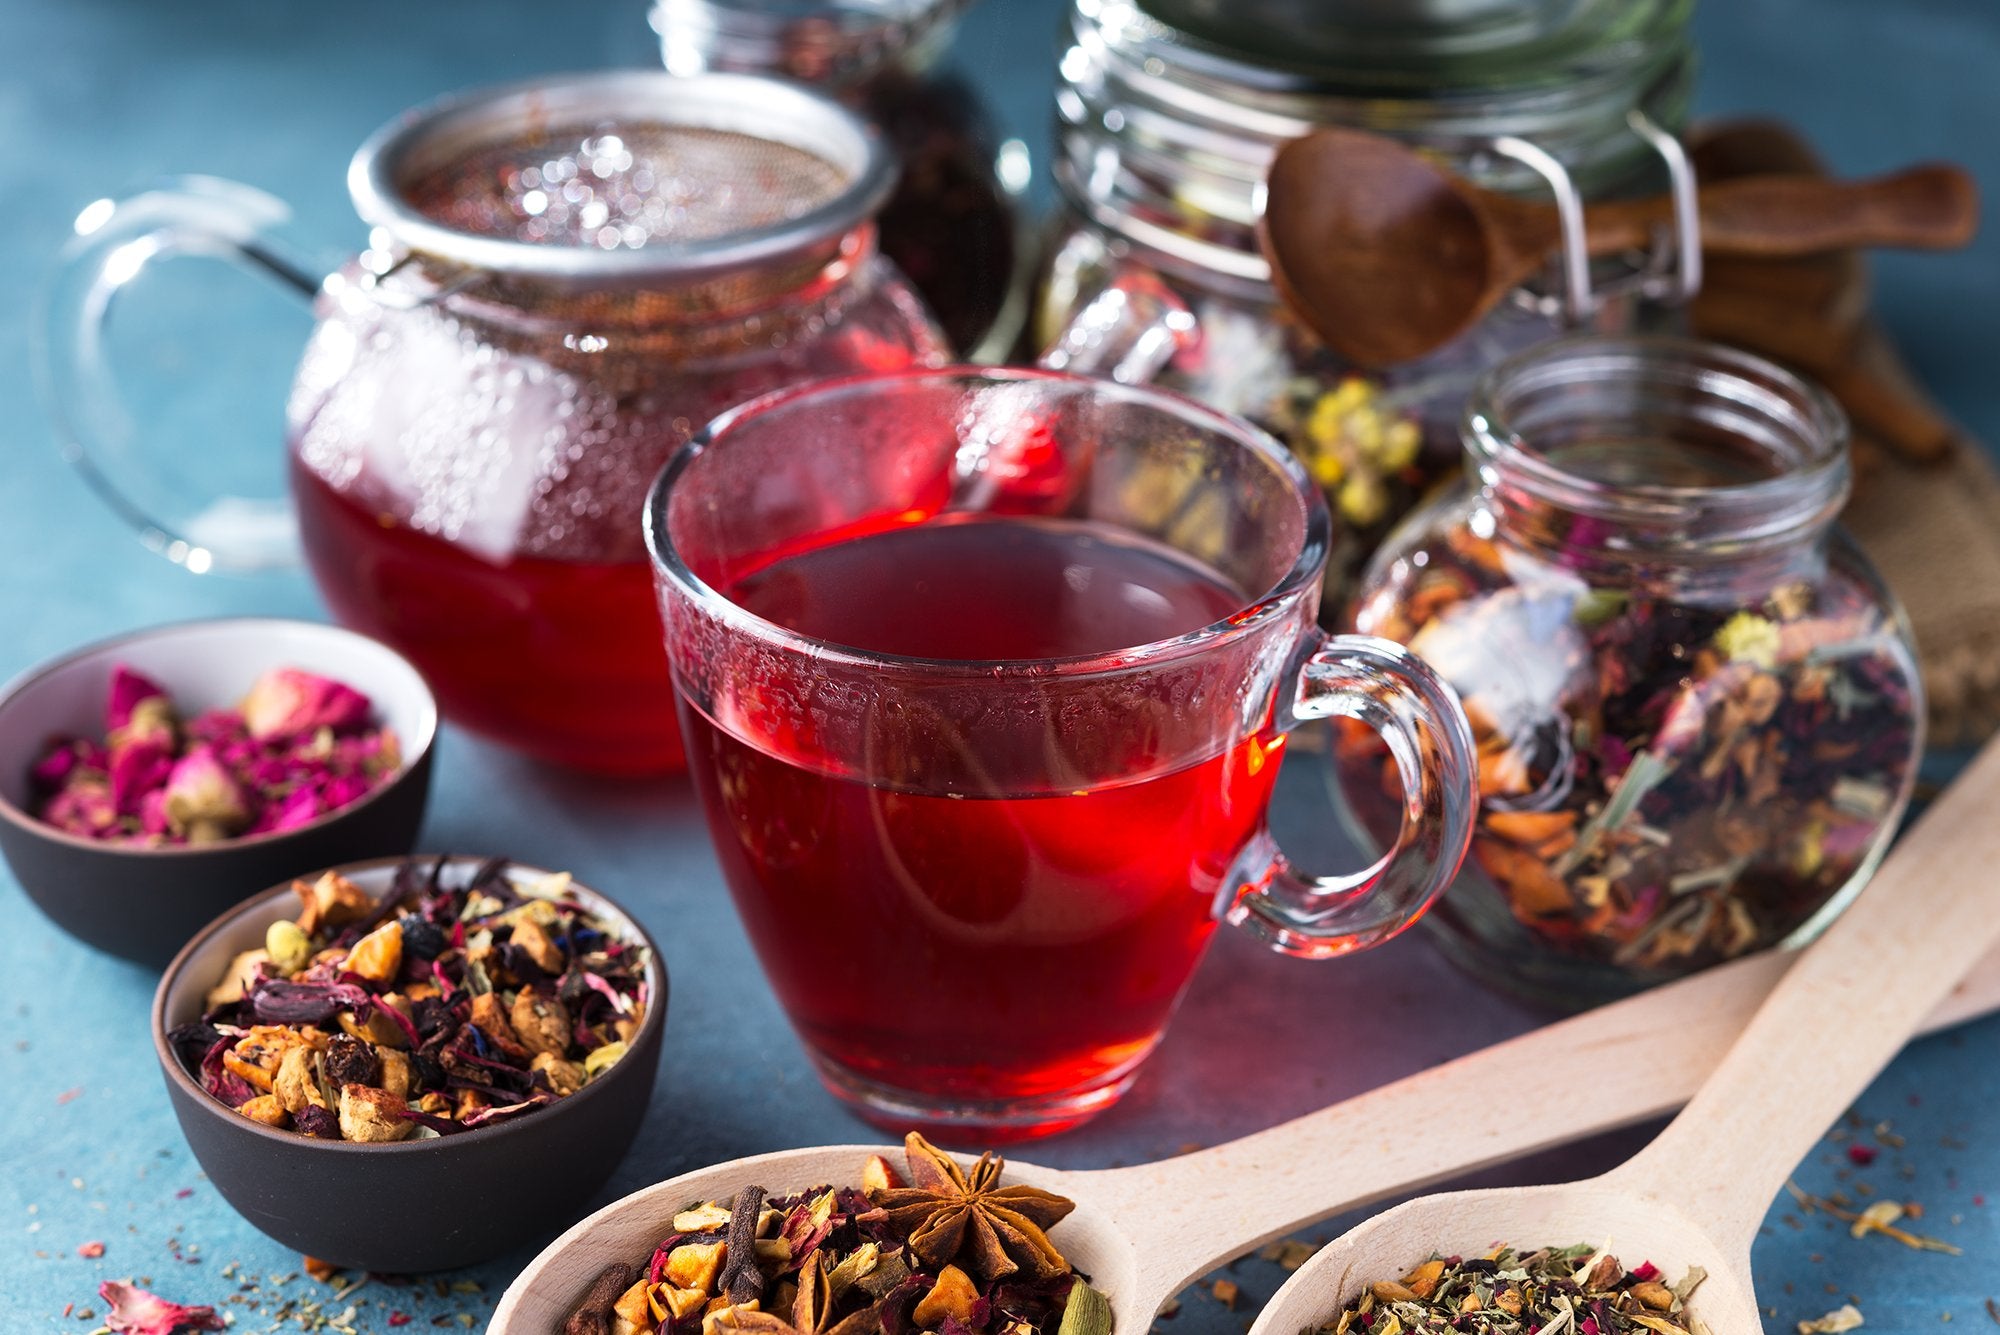 Teas & Infusions